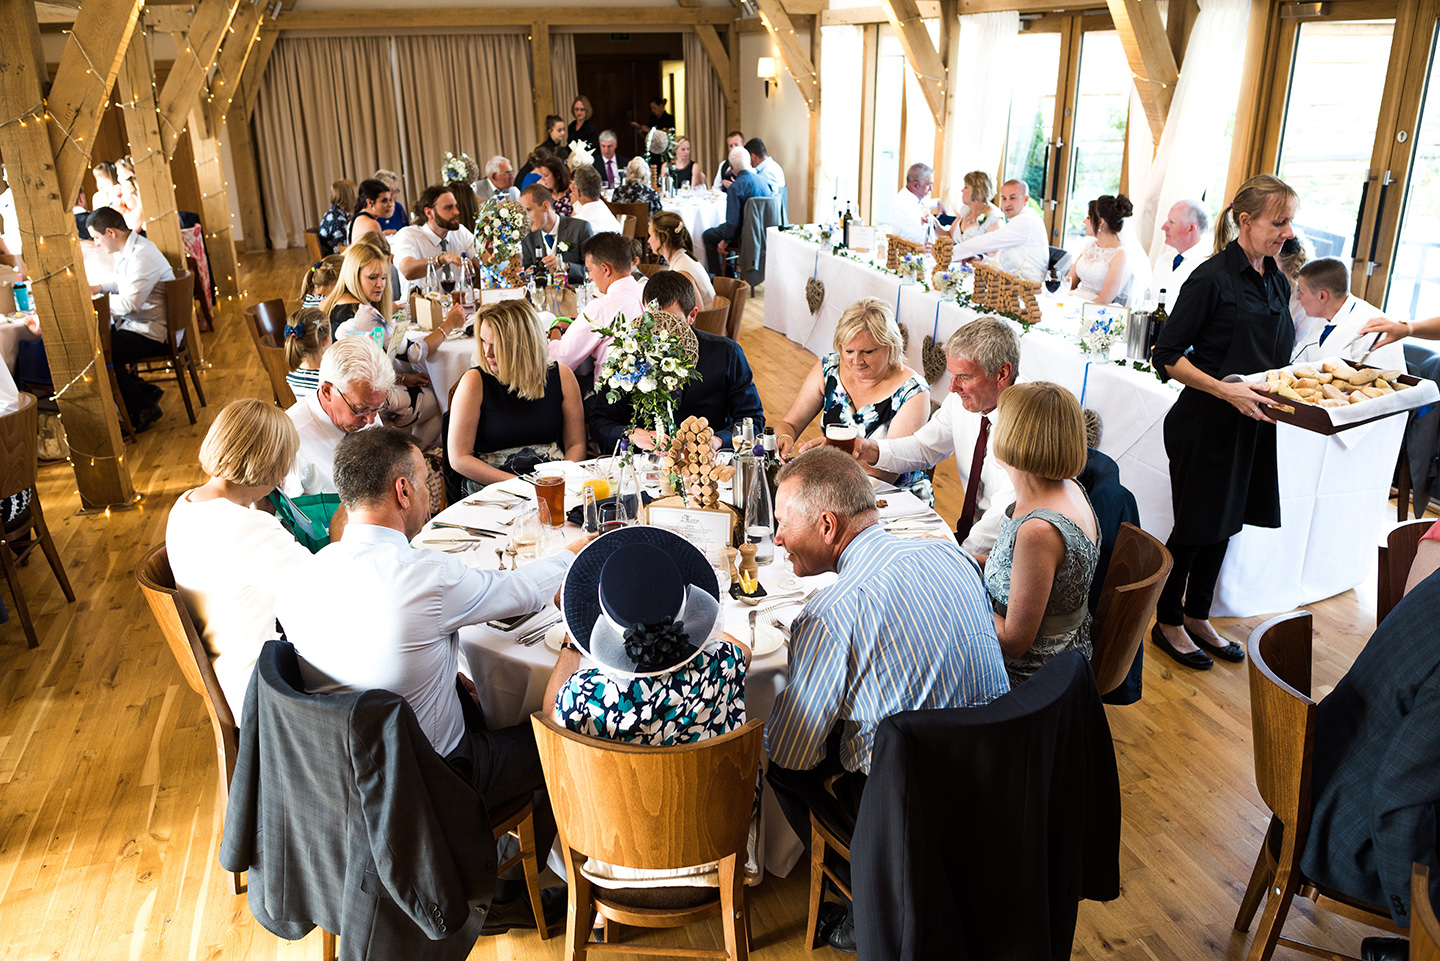 The happy couple and their guests sit down to enjoy a fabulous wedding breakfast cooked and served by the expert on-site catering team